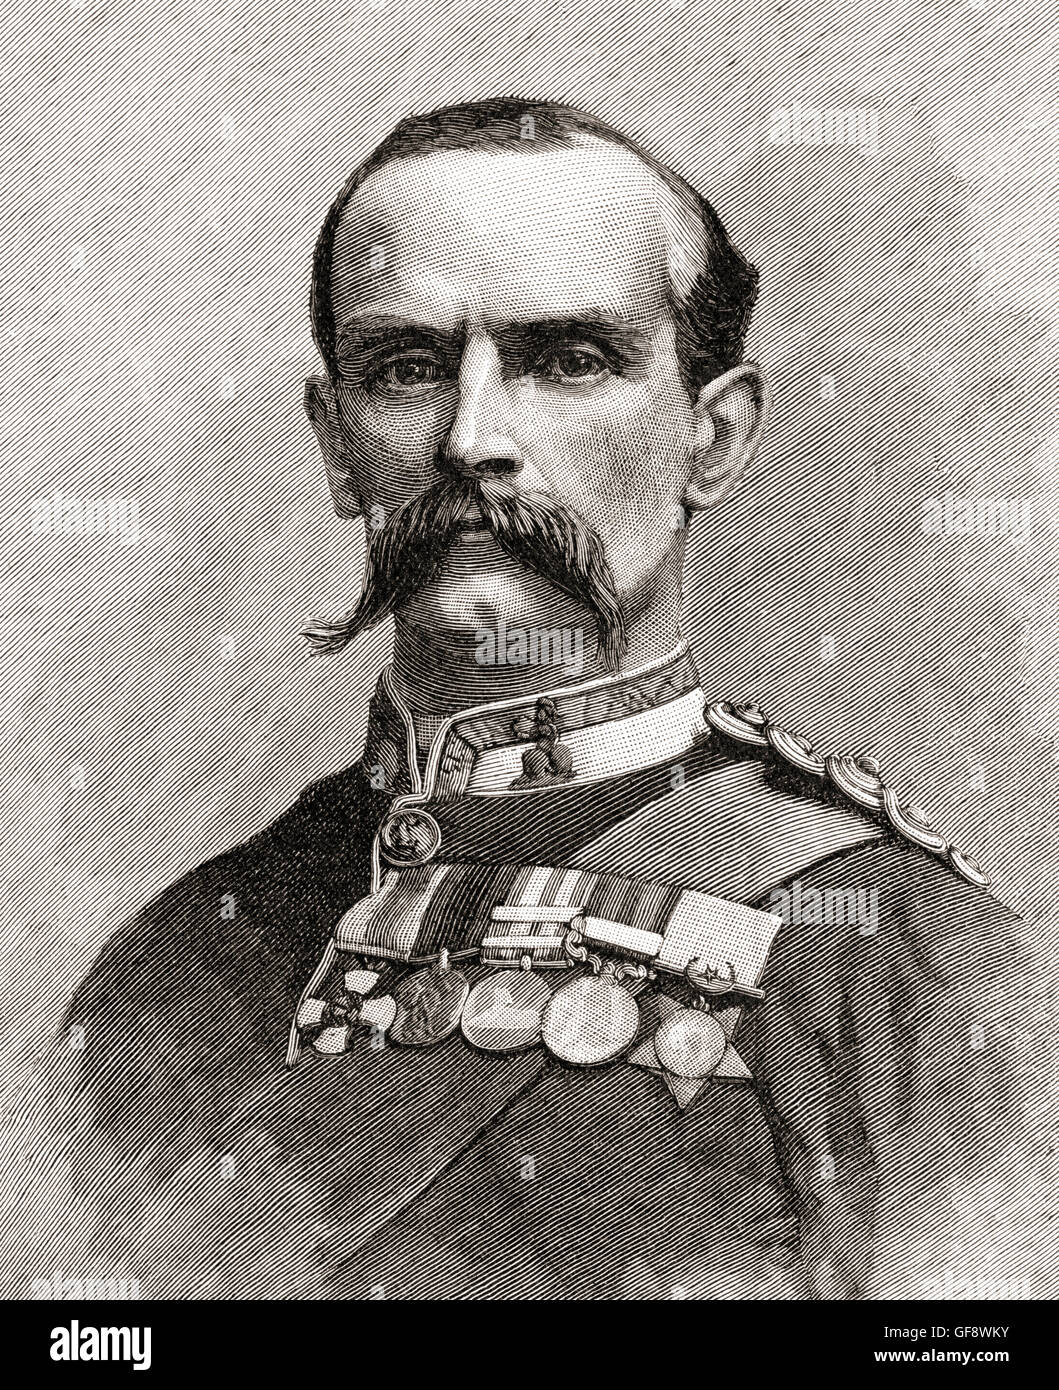 Frederick John Dealtry Lugard, 1st Baron Lugard, 1858 –  1945, aka Sir Frederick Lugard.  British soldier, mercenary, explorer of Africa and colonial administrator, Governor of Hong Kong and first Governor-General of Nigeria. Stock Photo